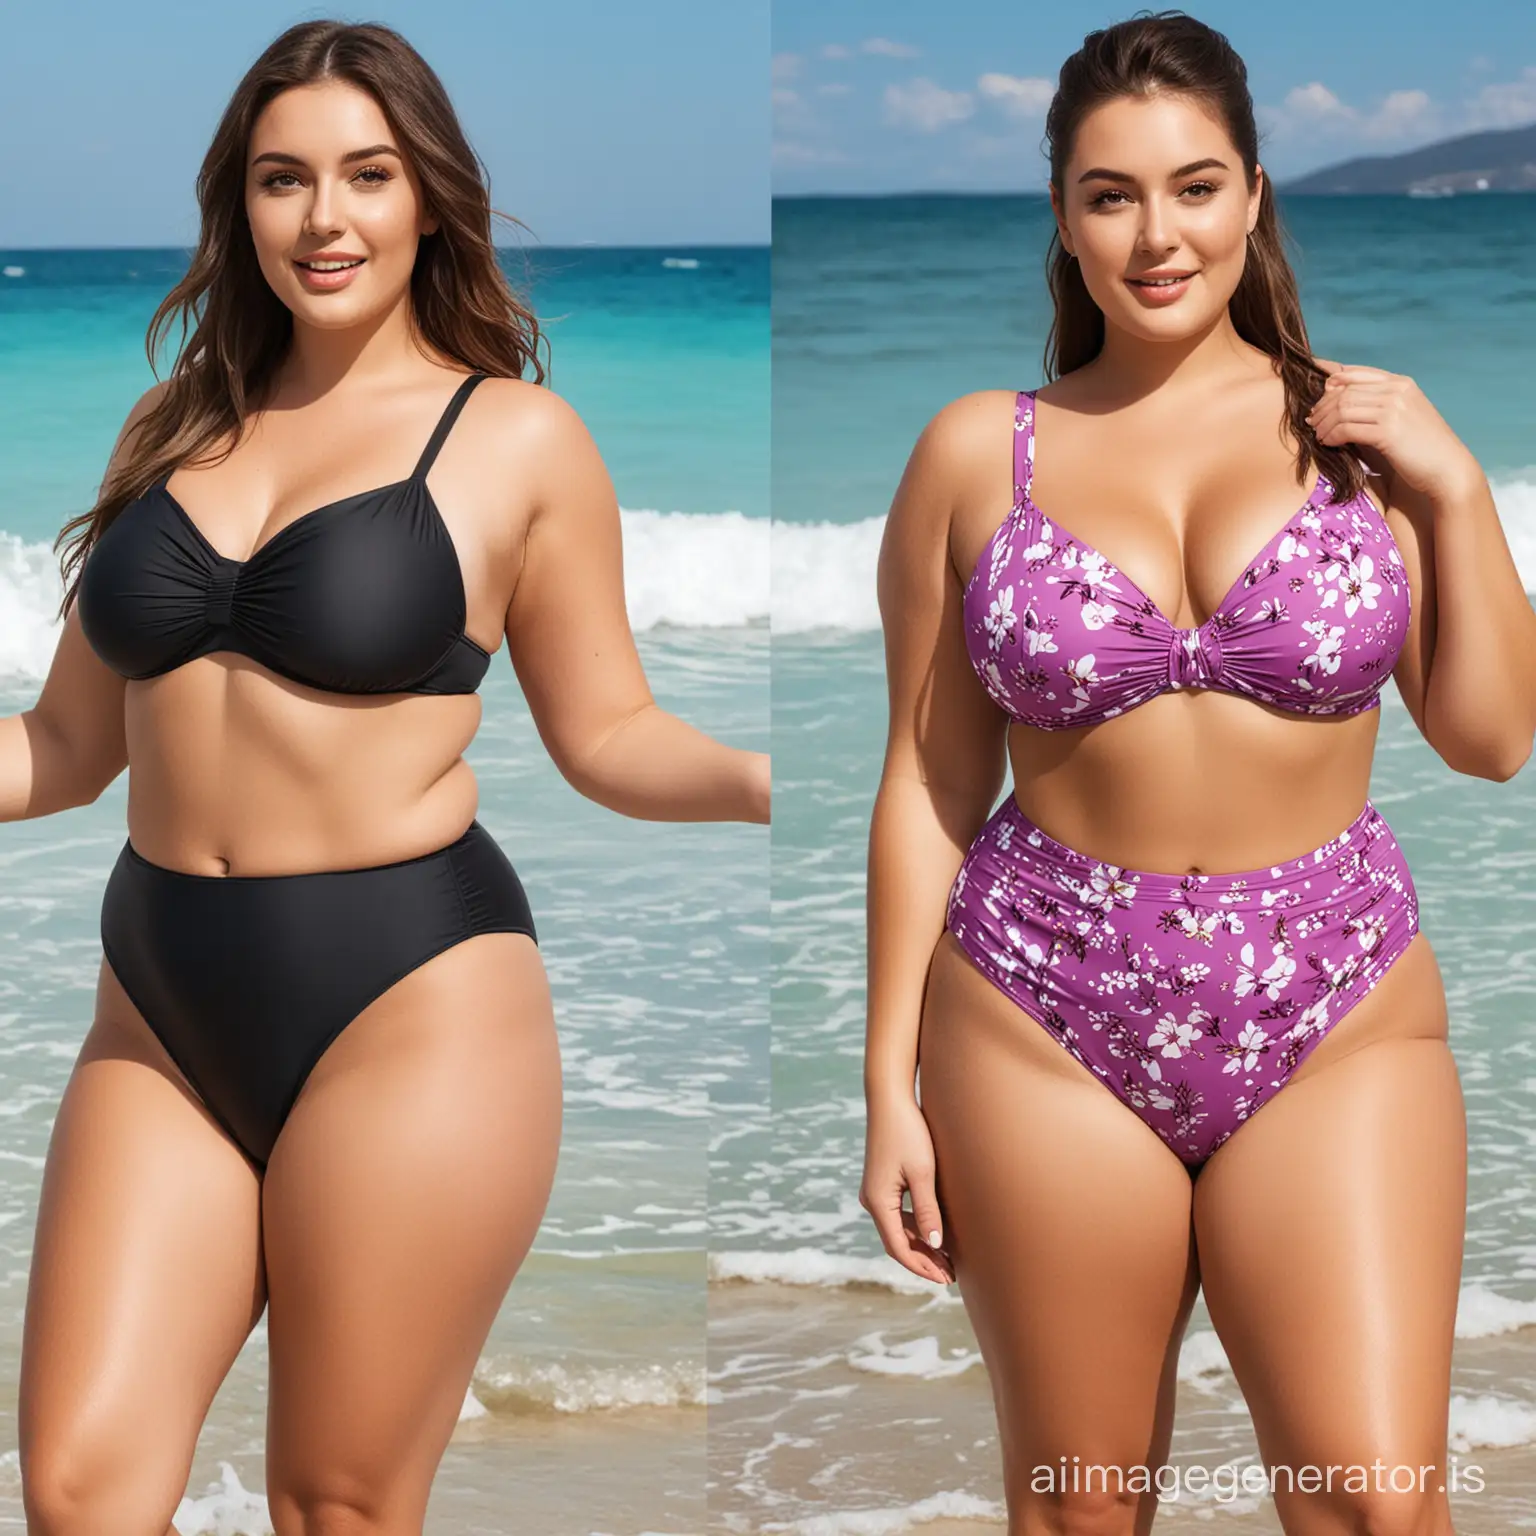 banner for an online store who sales swimwears for plus size